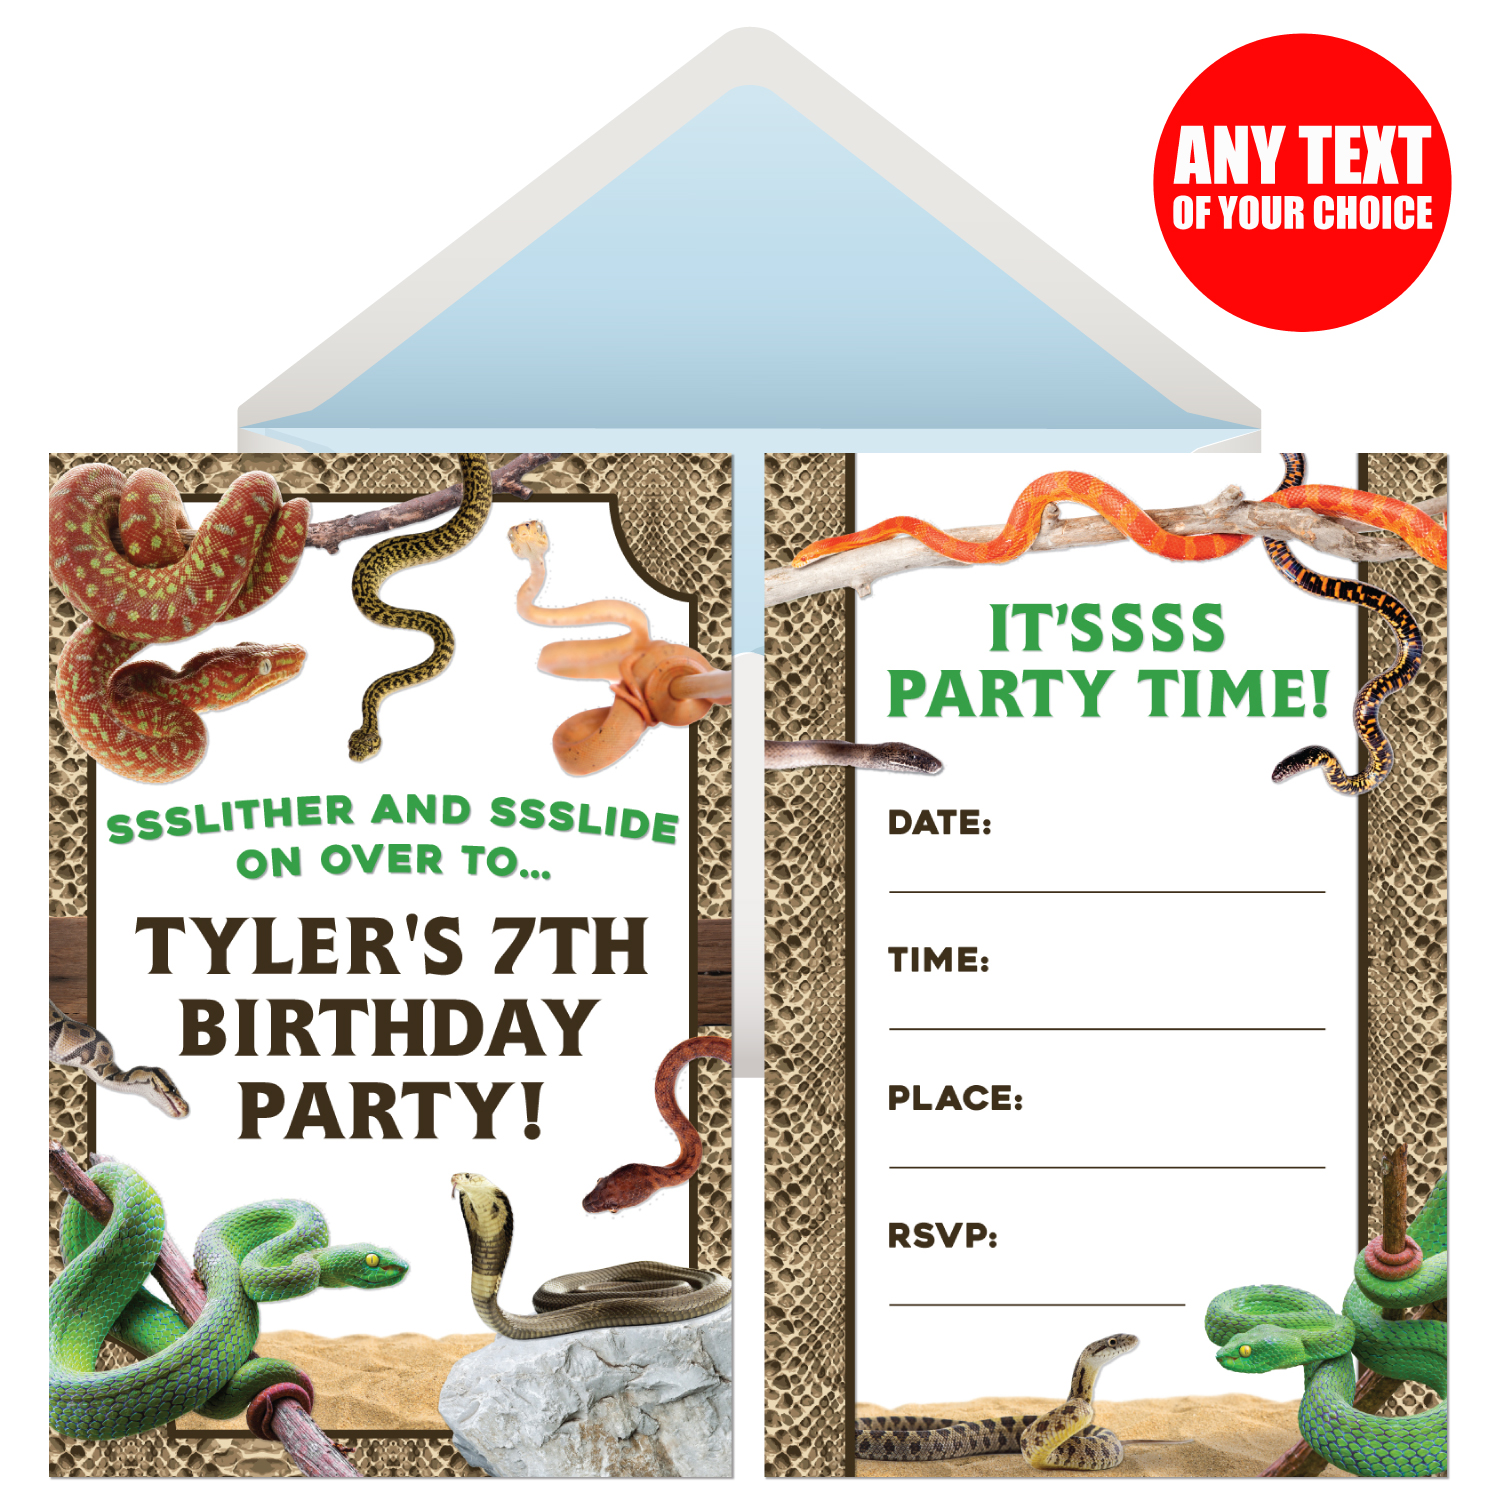 Reptile Party Supplies Party Supplies Canada Open A Party - roblox character pinata personalize colors and details 7th birthday party ideas roblox roblox birthday cake